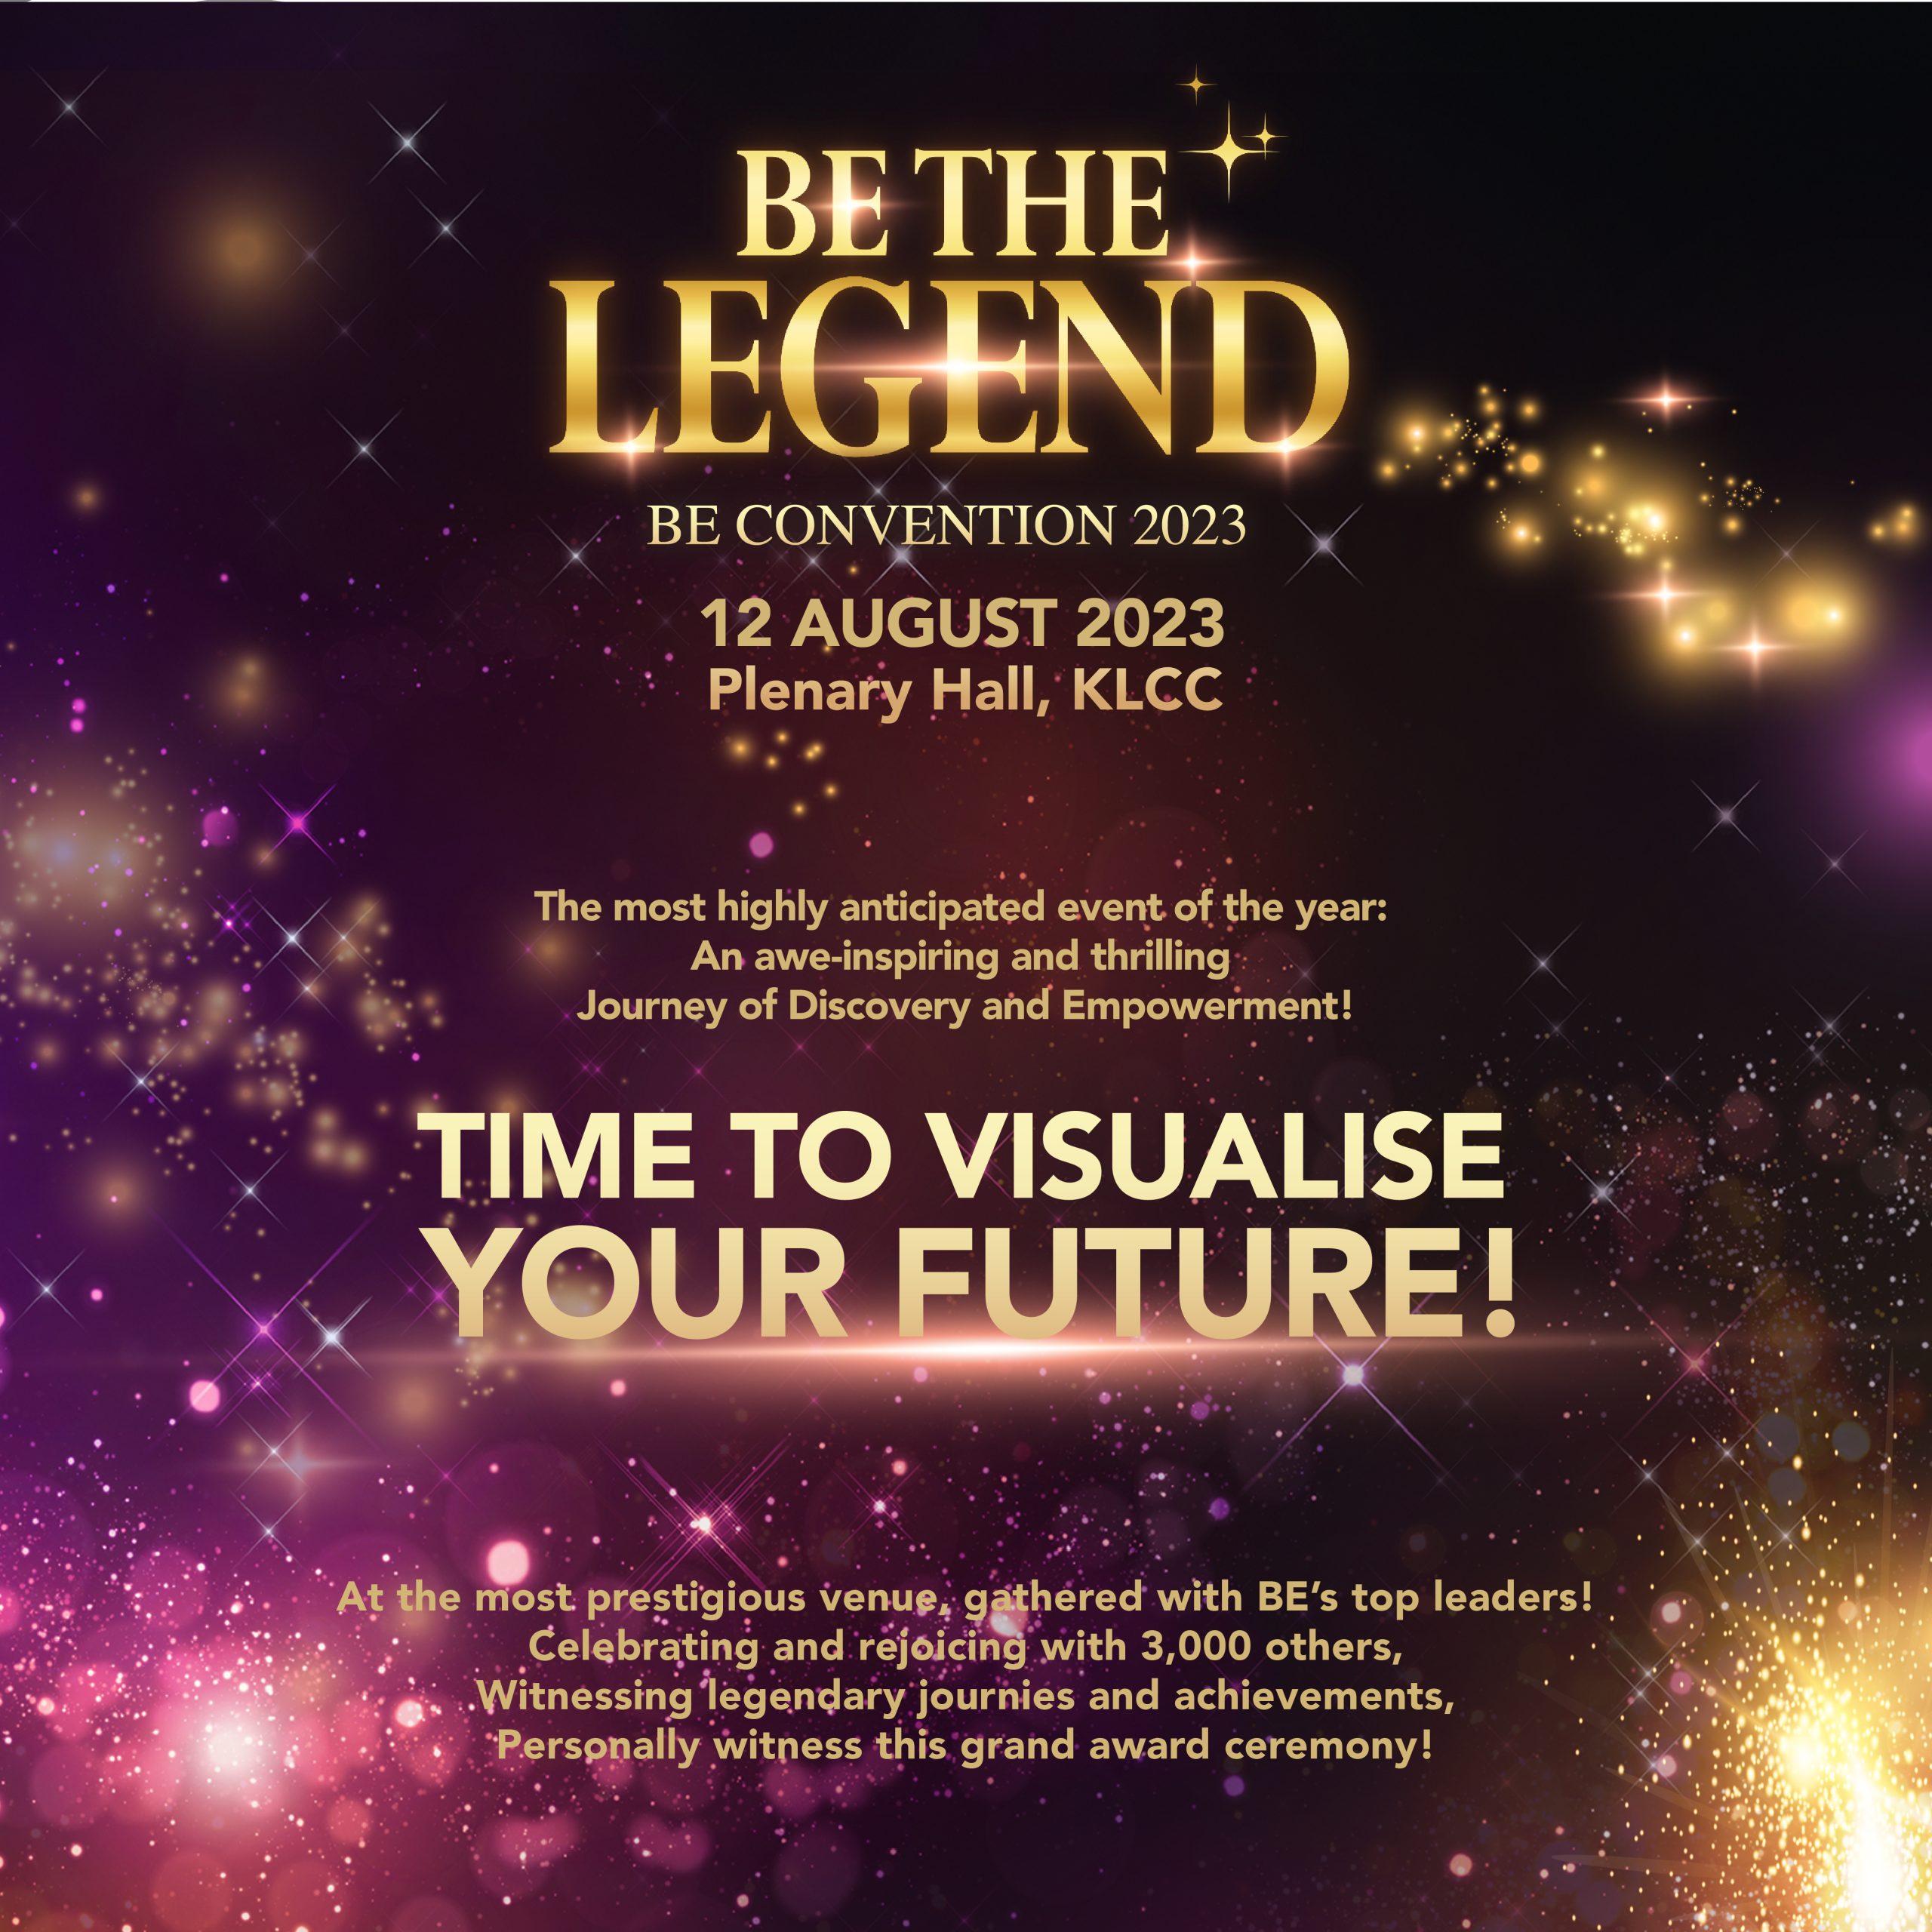 BE THE LEGEND CONVENTION 2023 | Legend Speakers